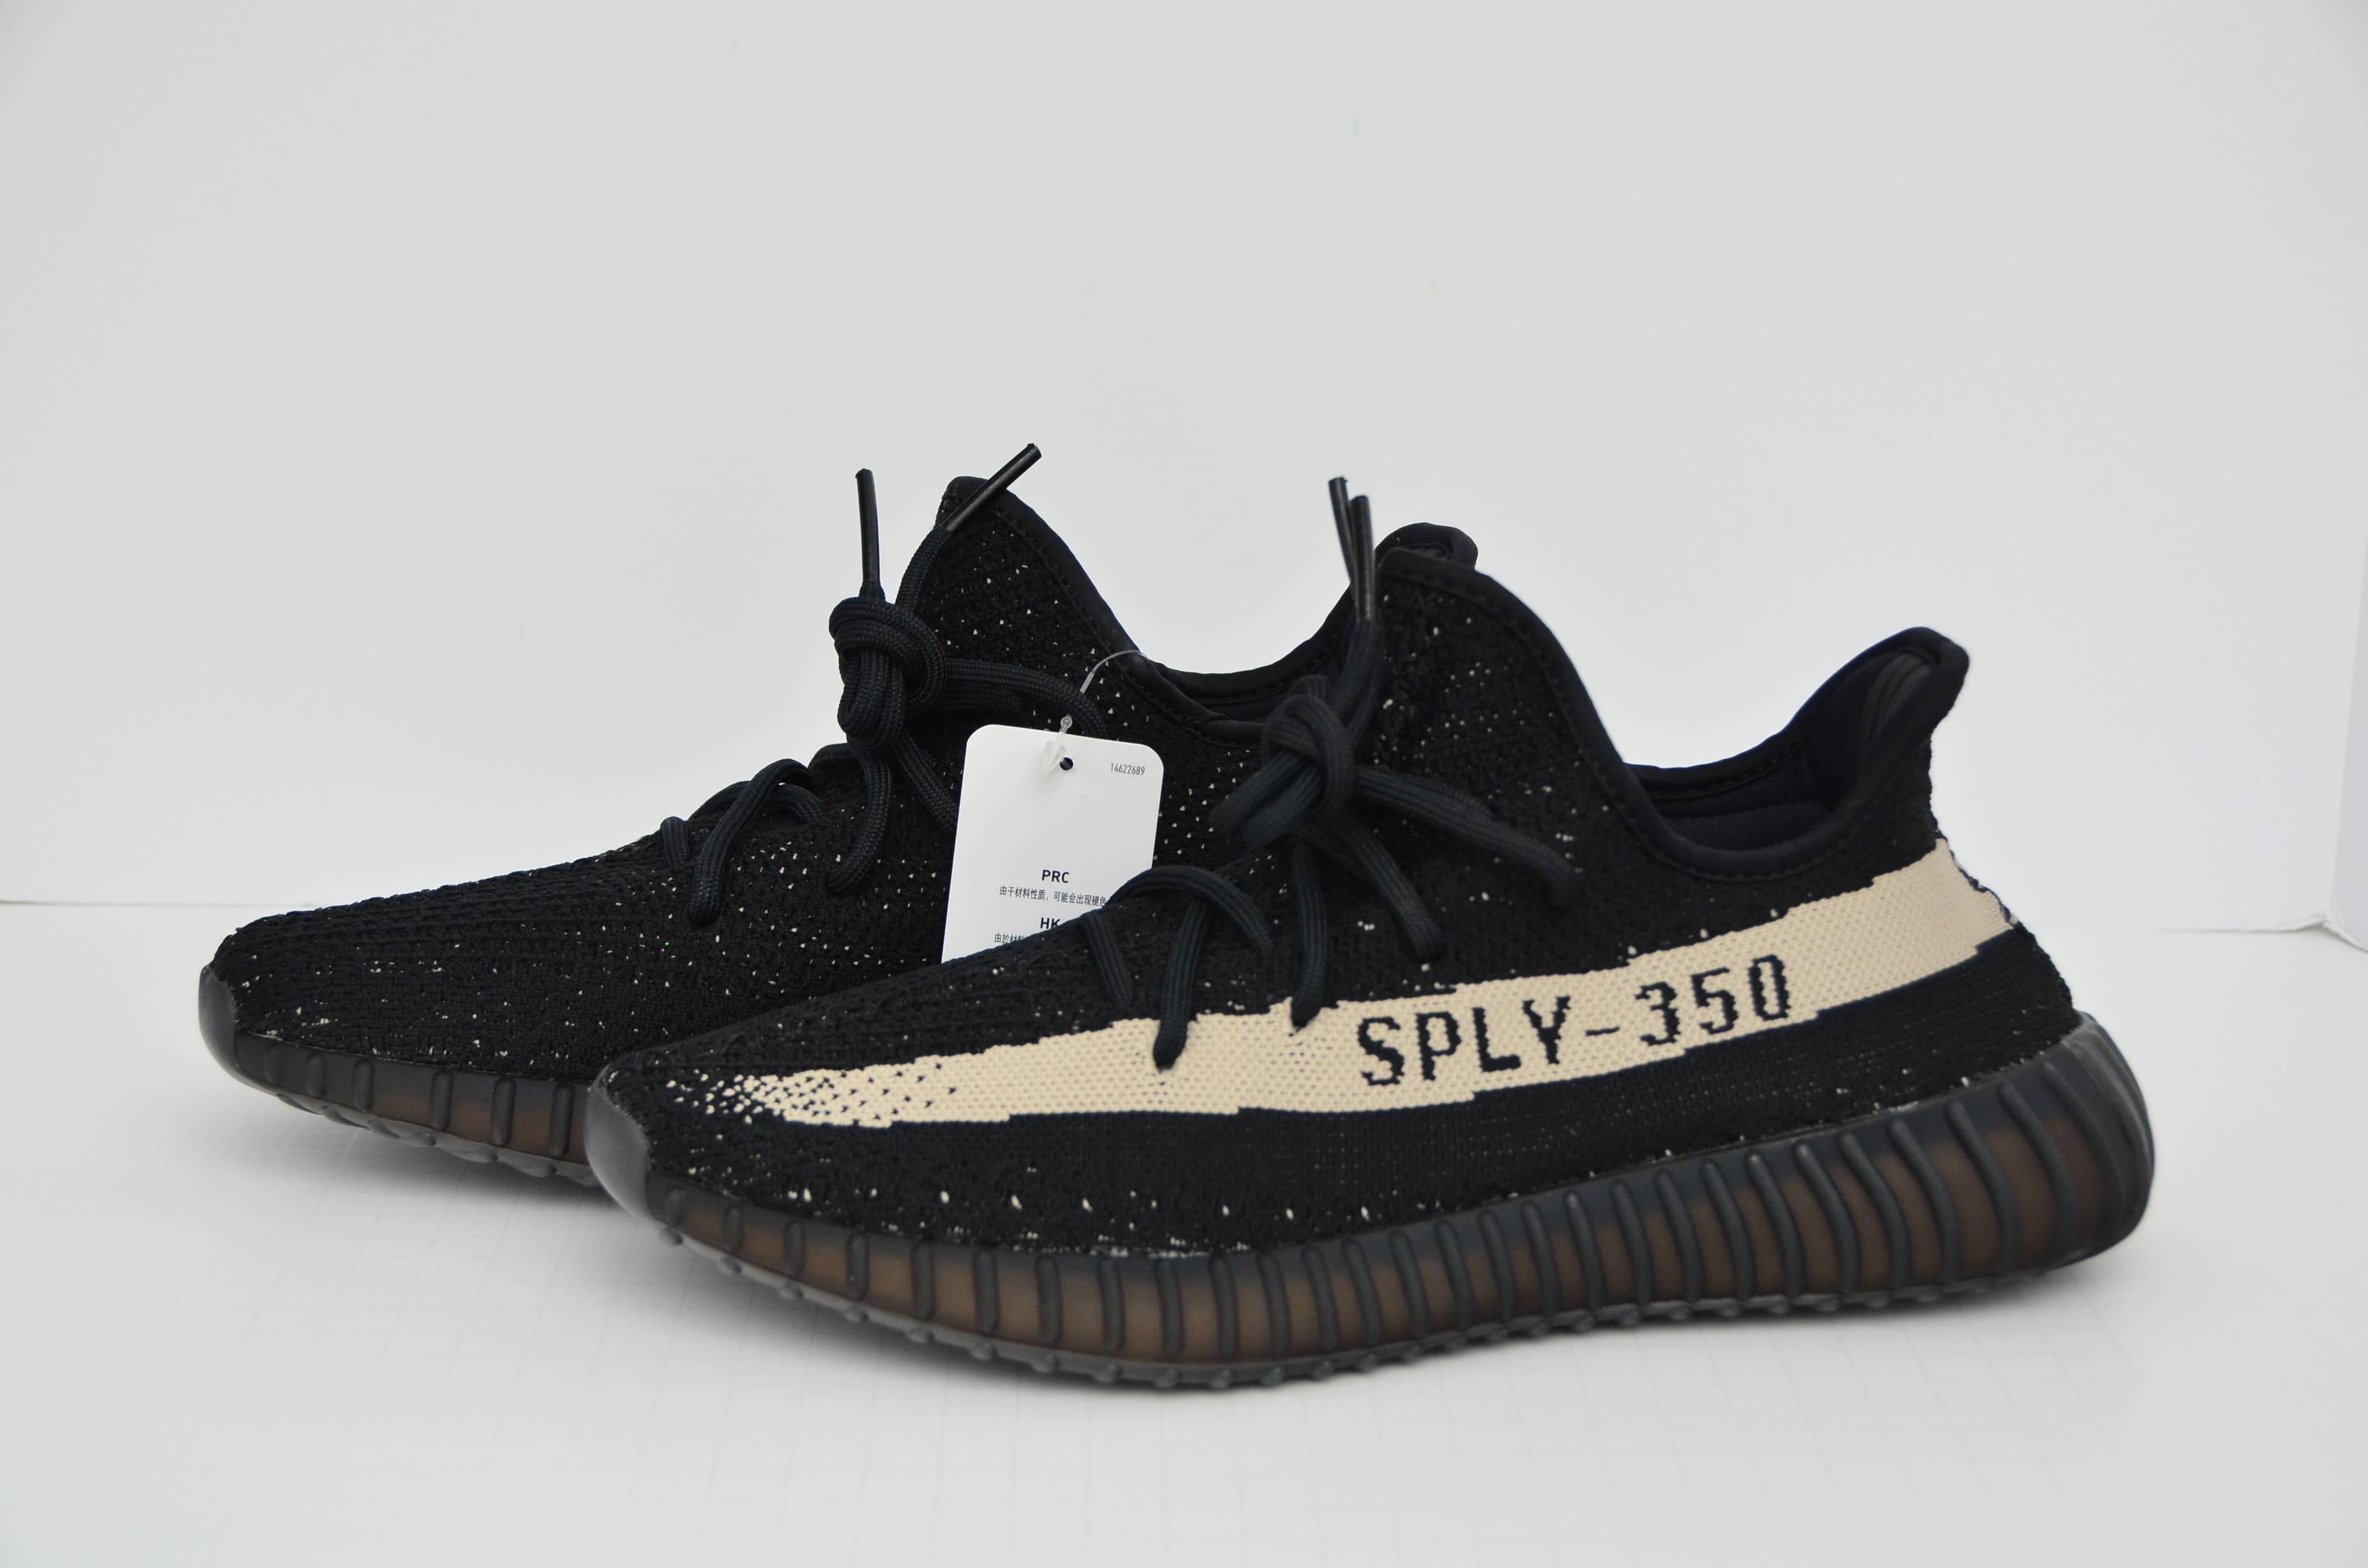 Women's or Men's Adidas Black Yeezy Boost 350 V2  NEW Size 9.5